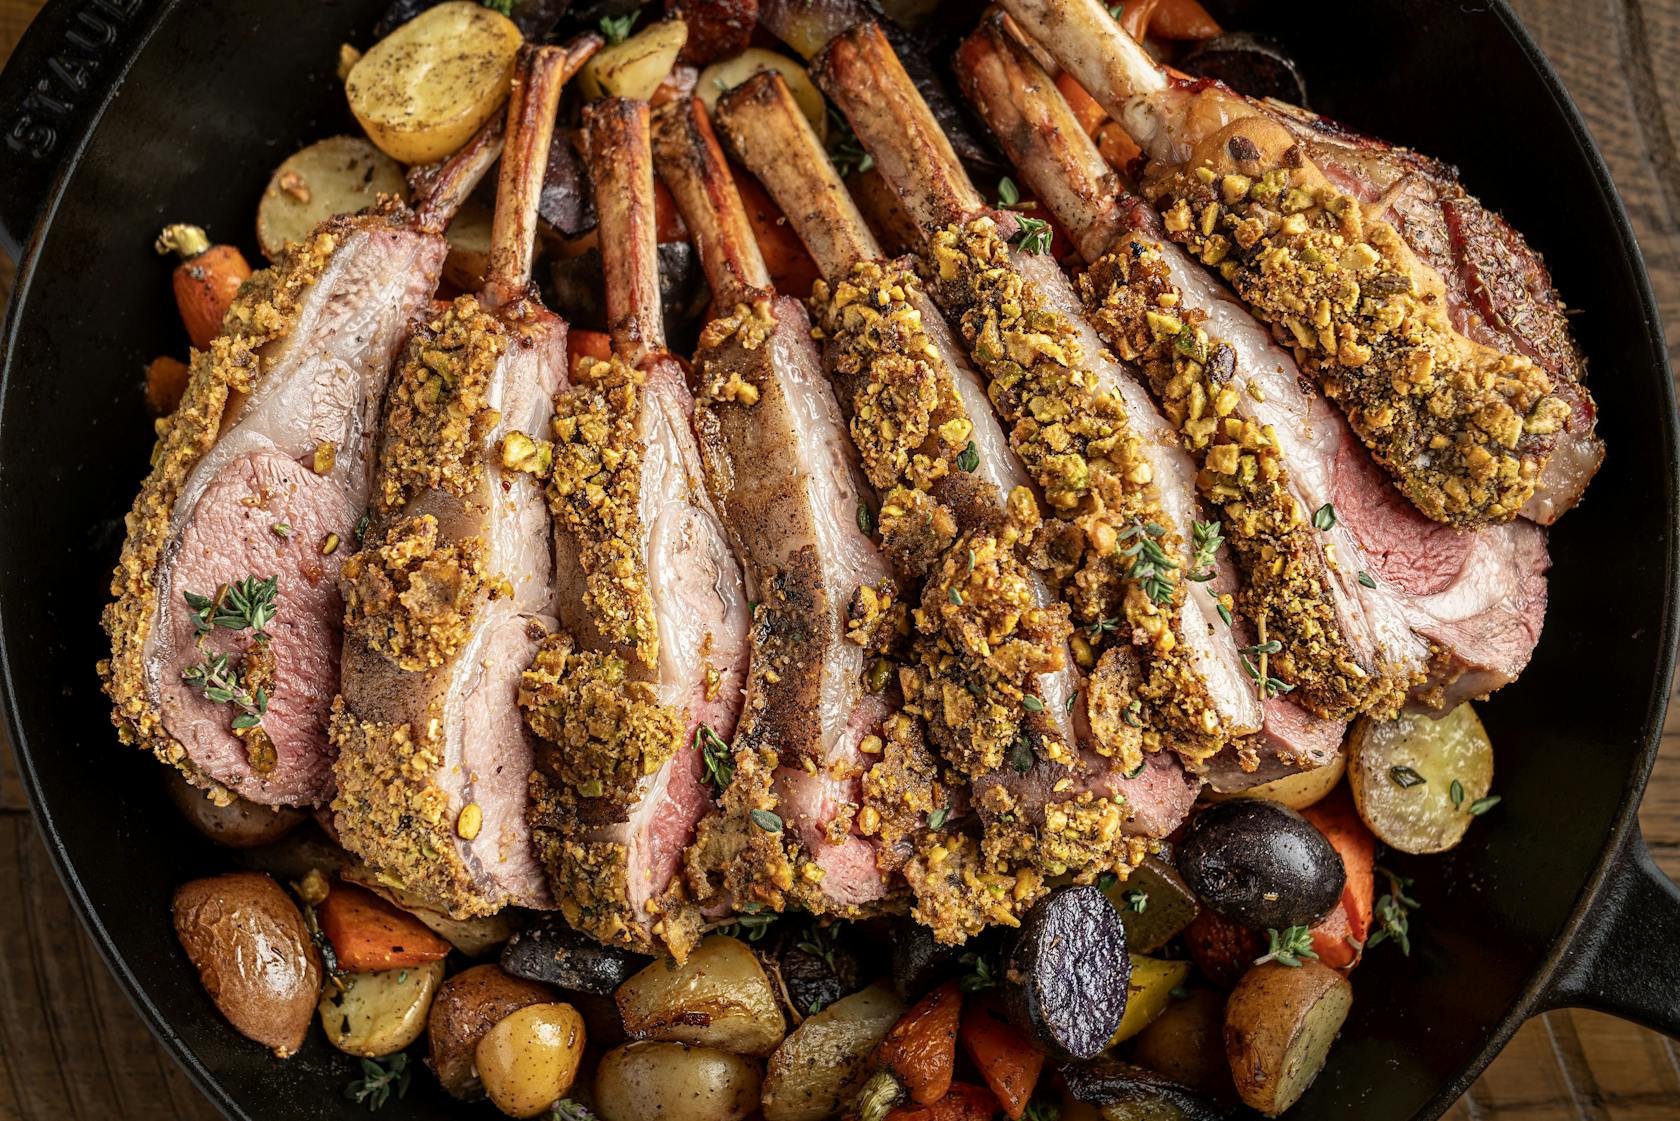 Pistachio Crusted Lamb with Vegetables